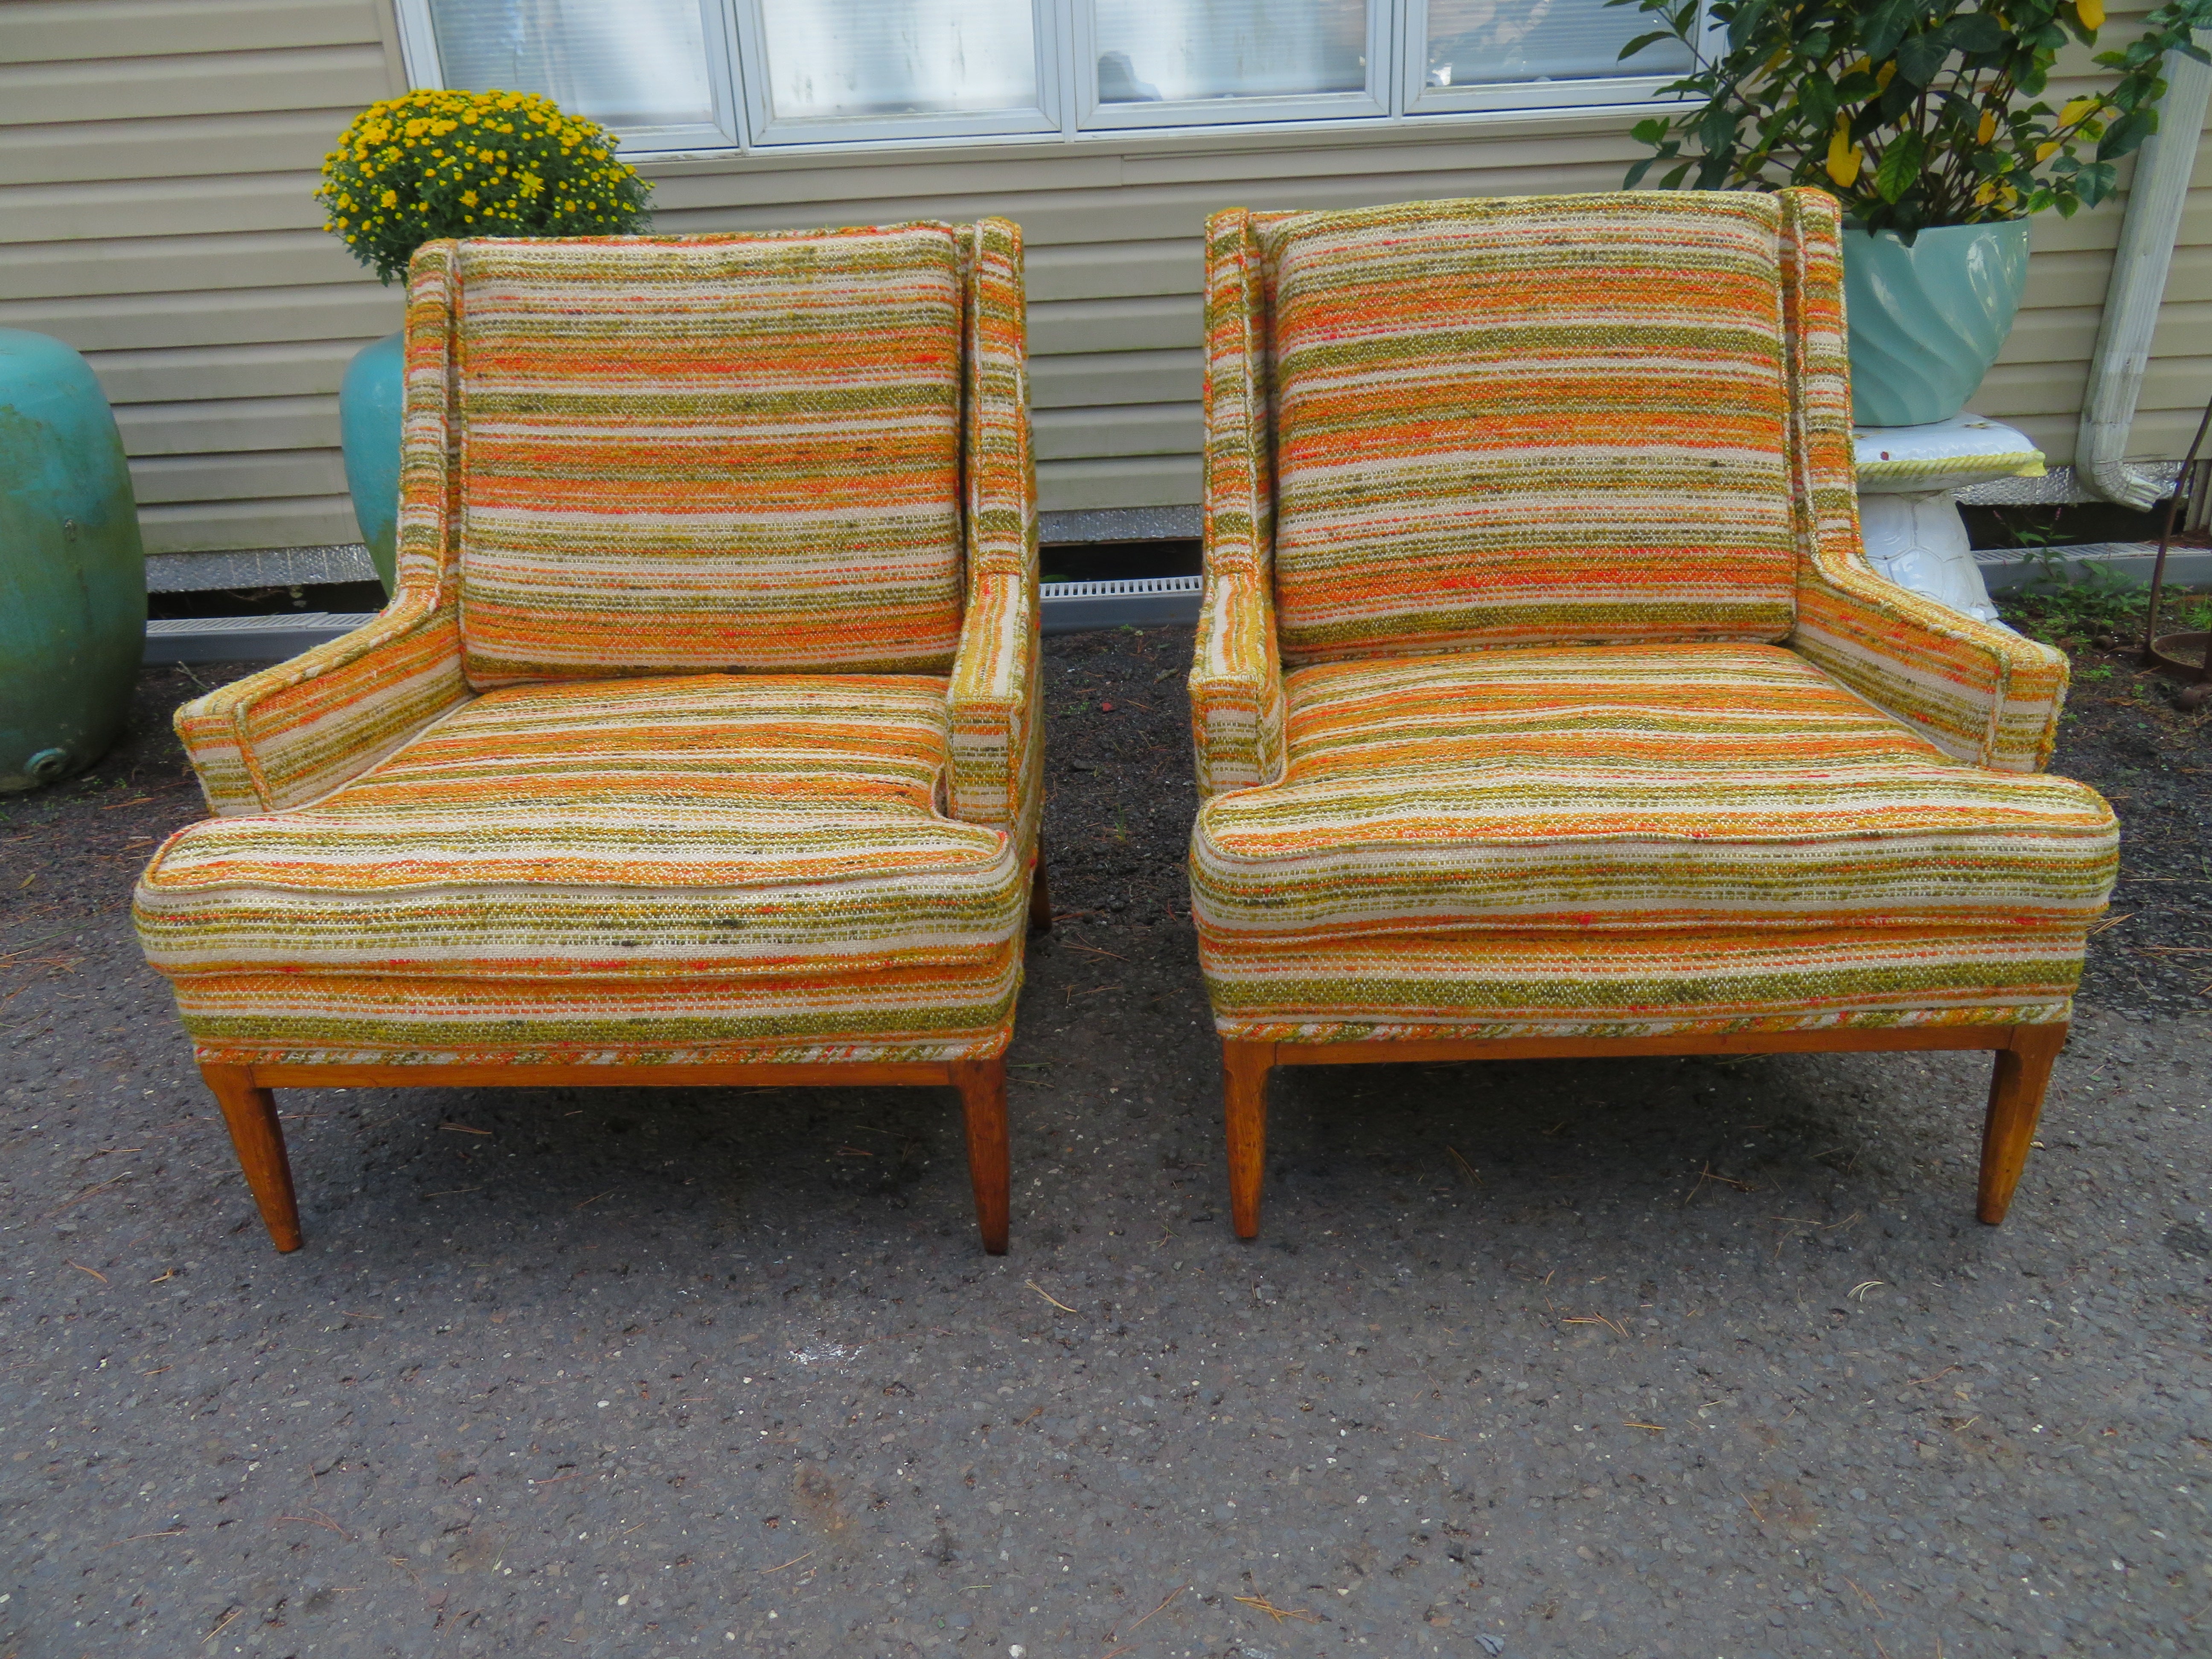 Gorgeous pair of Sophisticate for Tomlinson lounge chairs. These are quite rare and are part of one of my favorite mid-century modern furniture collections-Sophisticate by Tomlinson. I love the original woven striped textured fabric and the